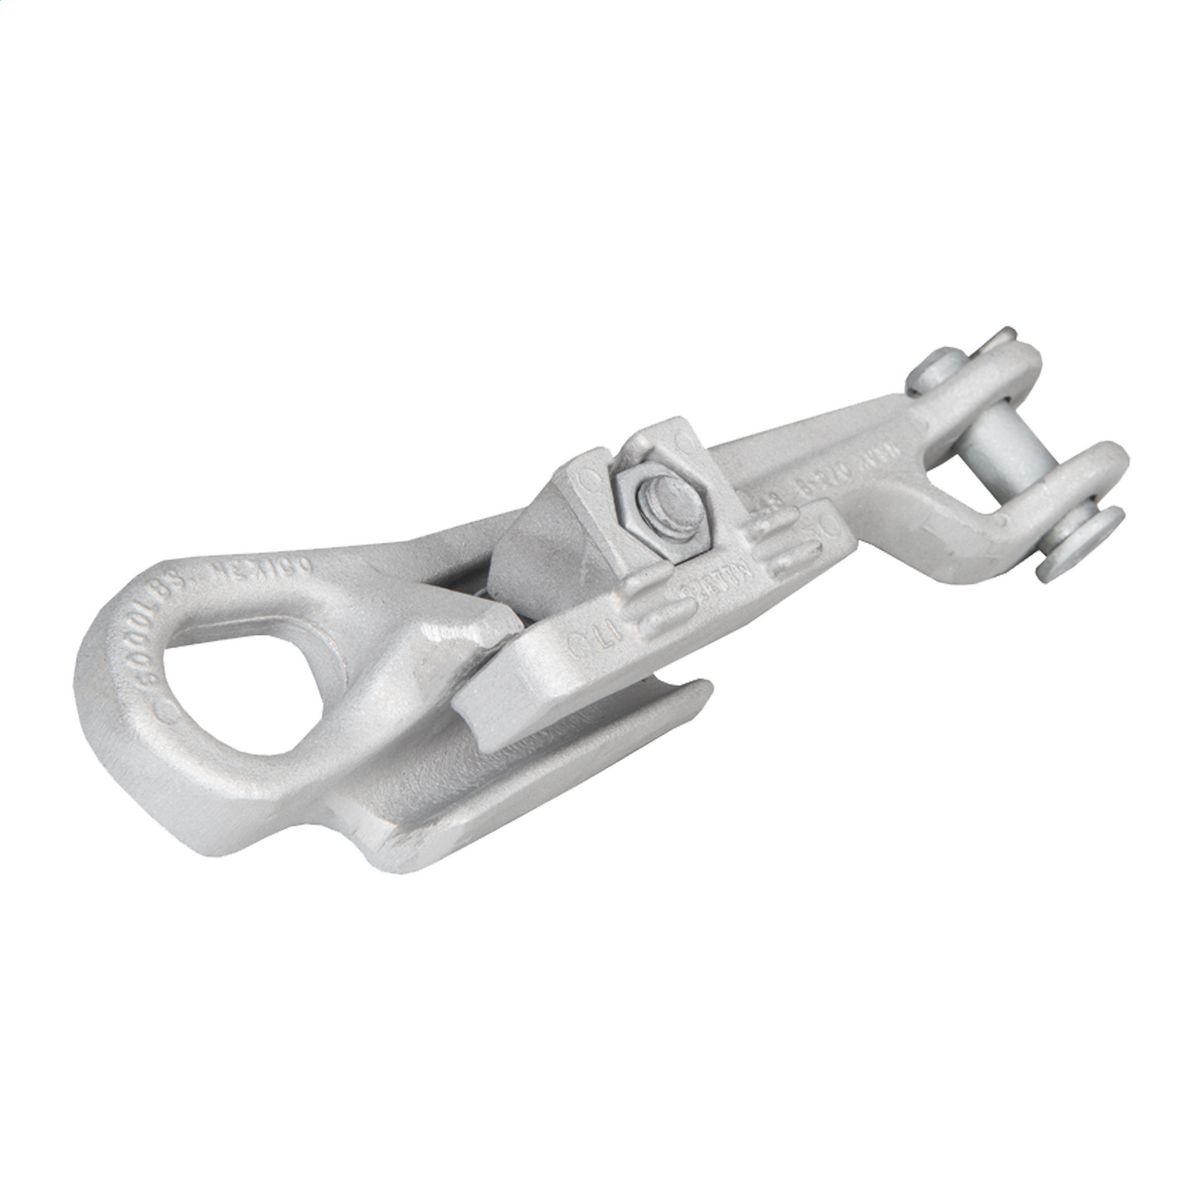 Aquifer Distribution  GREENLINE PC-11S Punch Clamp, 2-3/4 in Dia Inside,  Stainless Steel